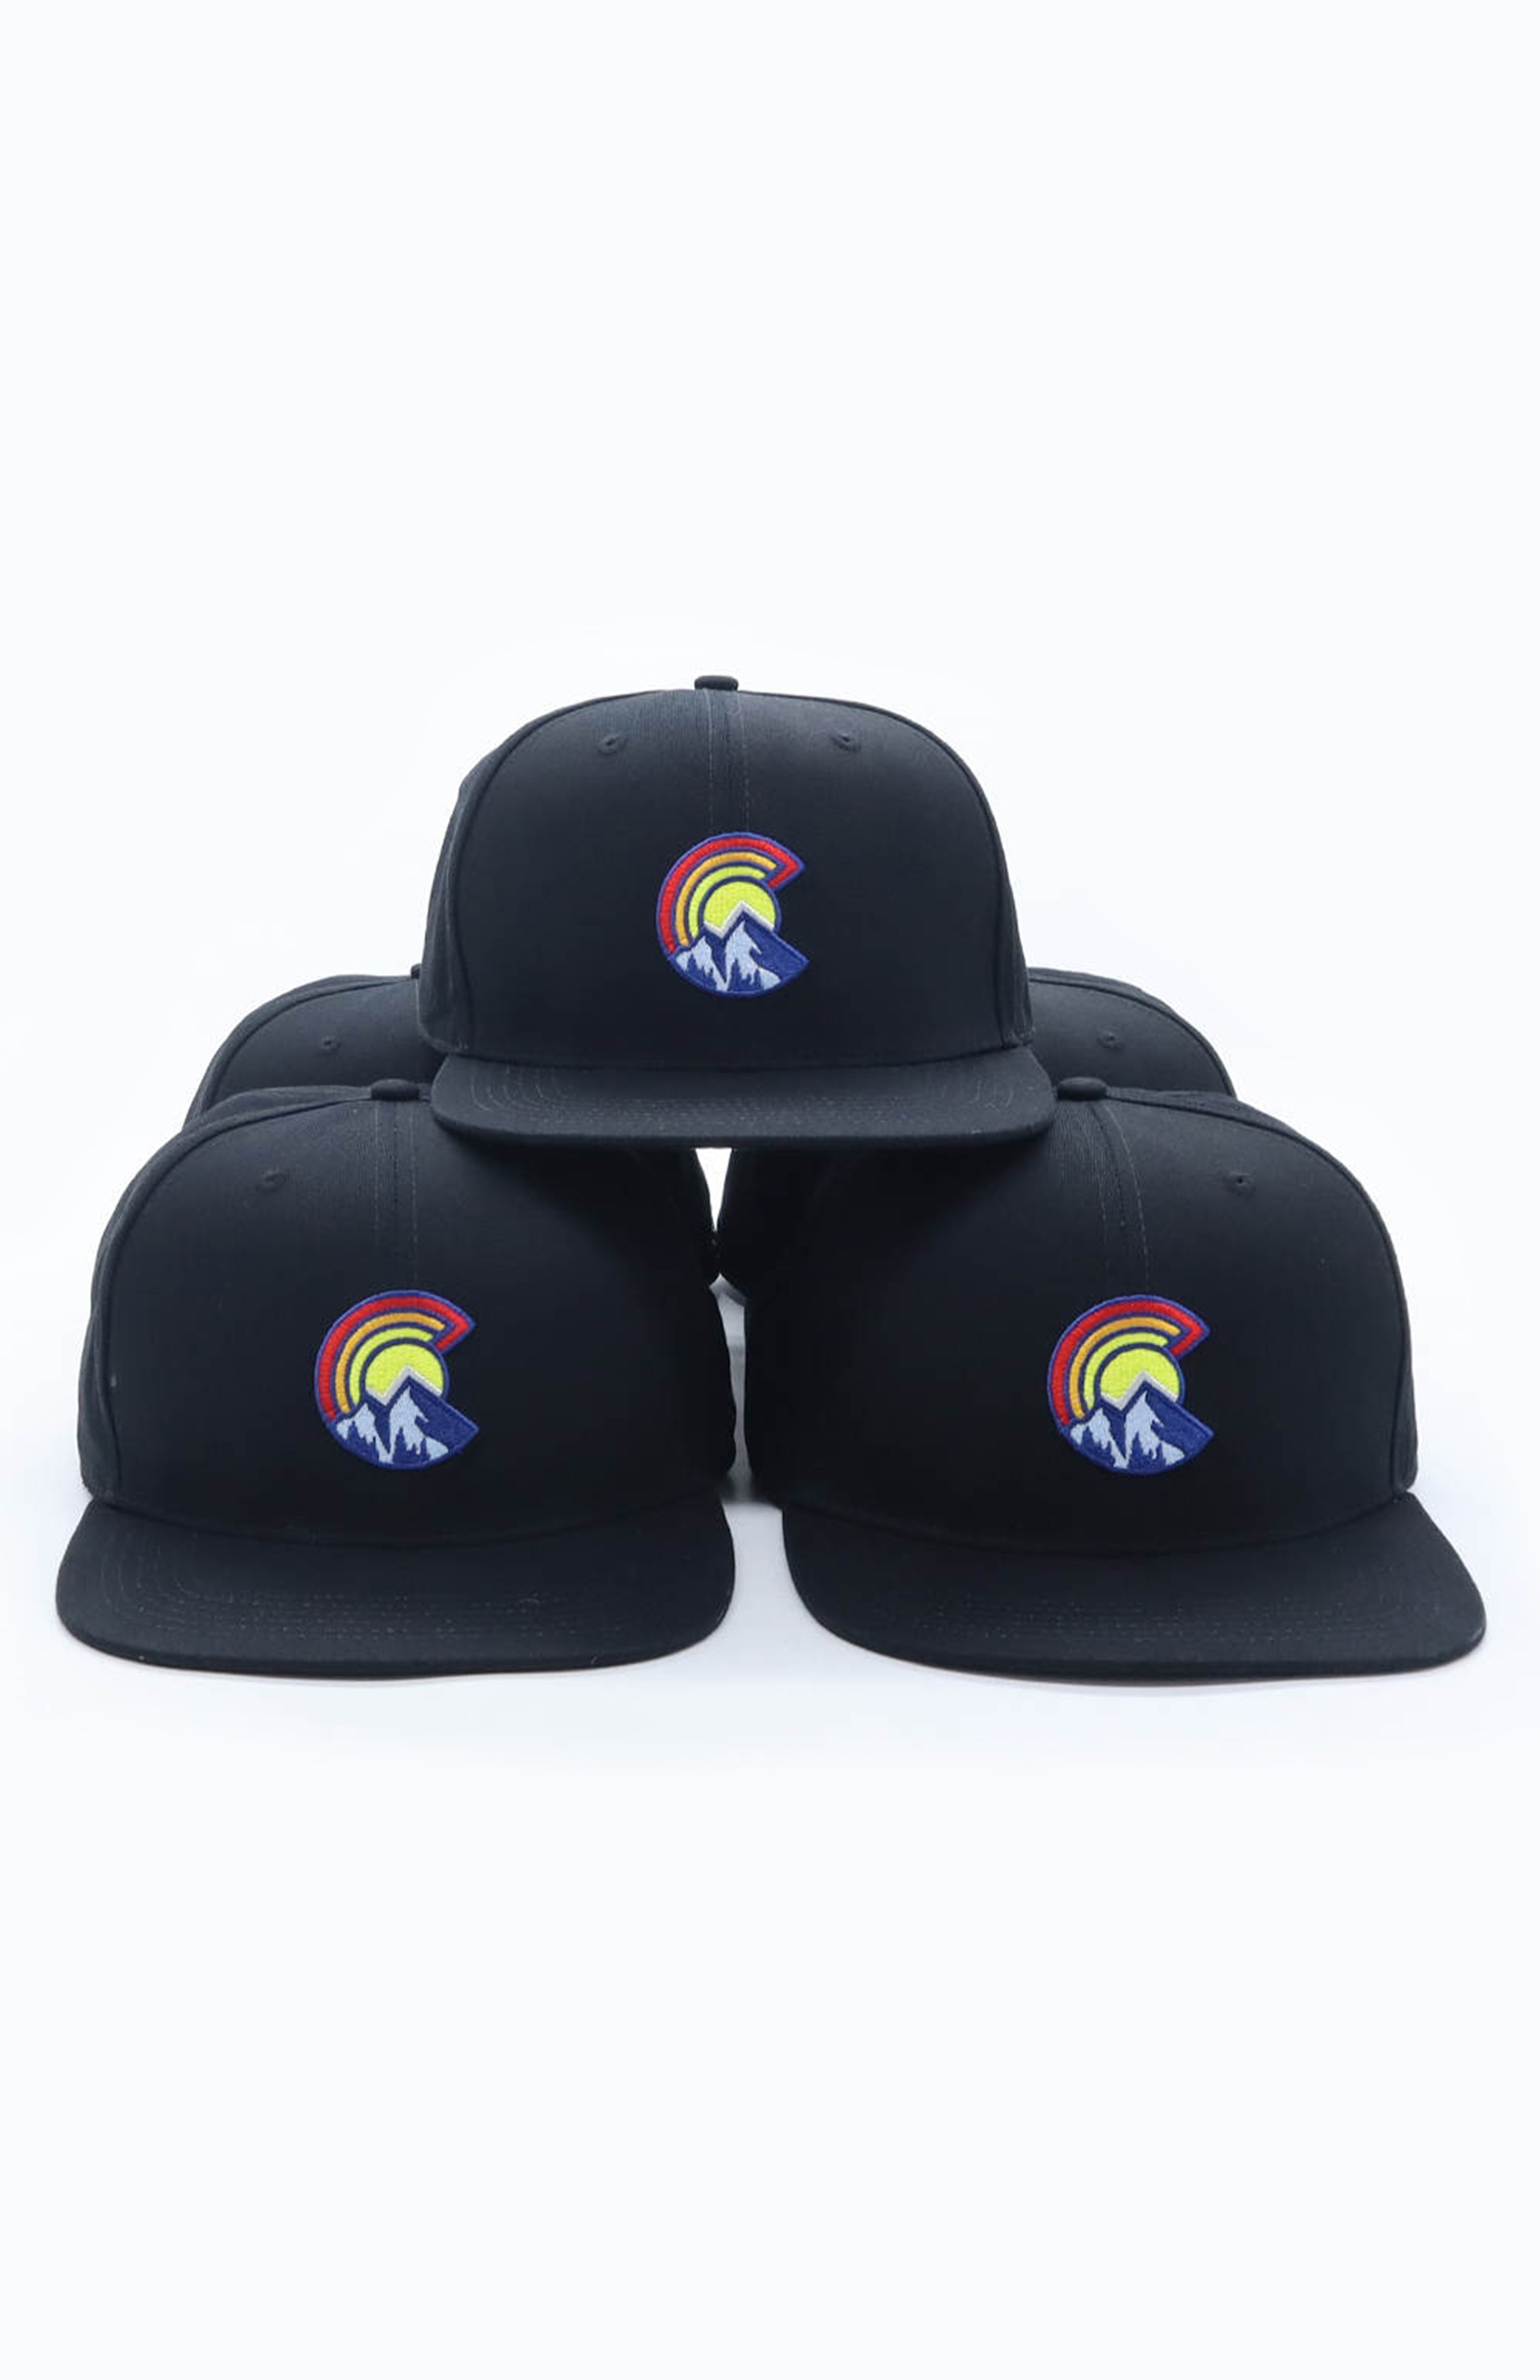 Colorful C Mountain Hat Black Colorway Colorado Threads Clothing